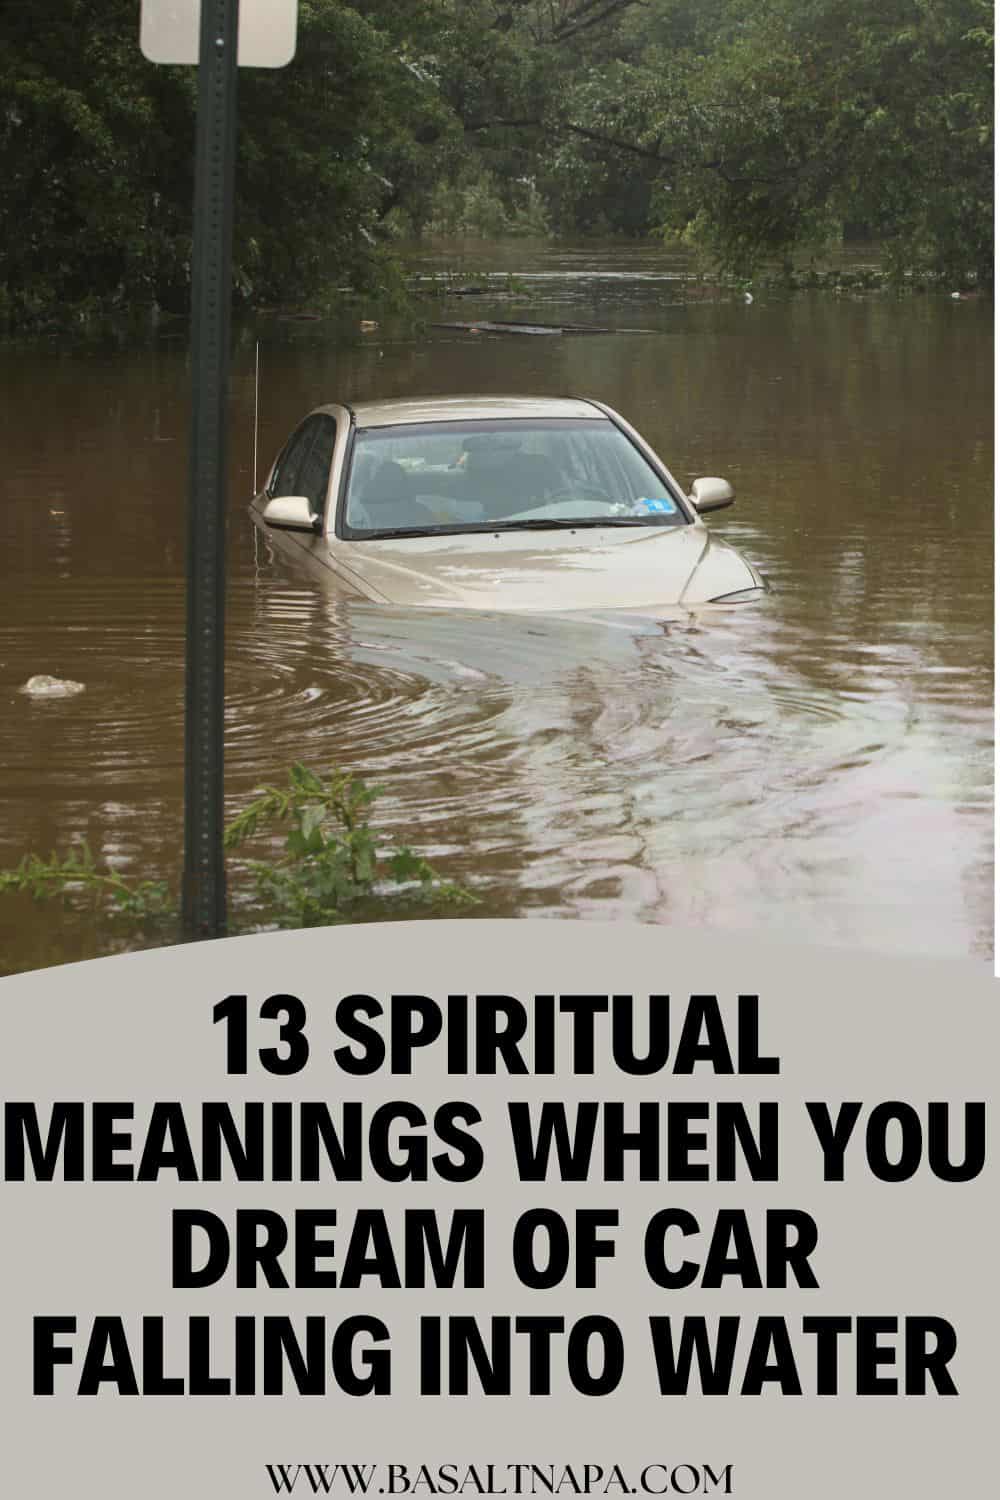 13 Spiritual Meanings When You Dream of Car Falling Into Water